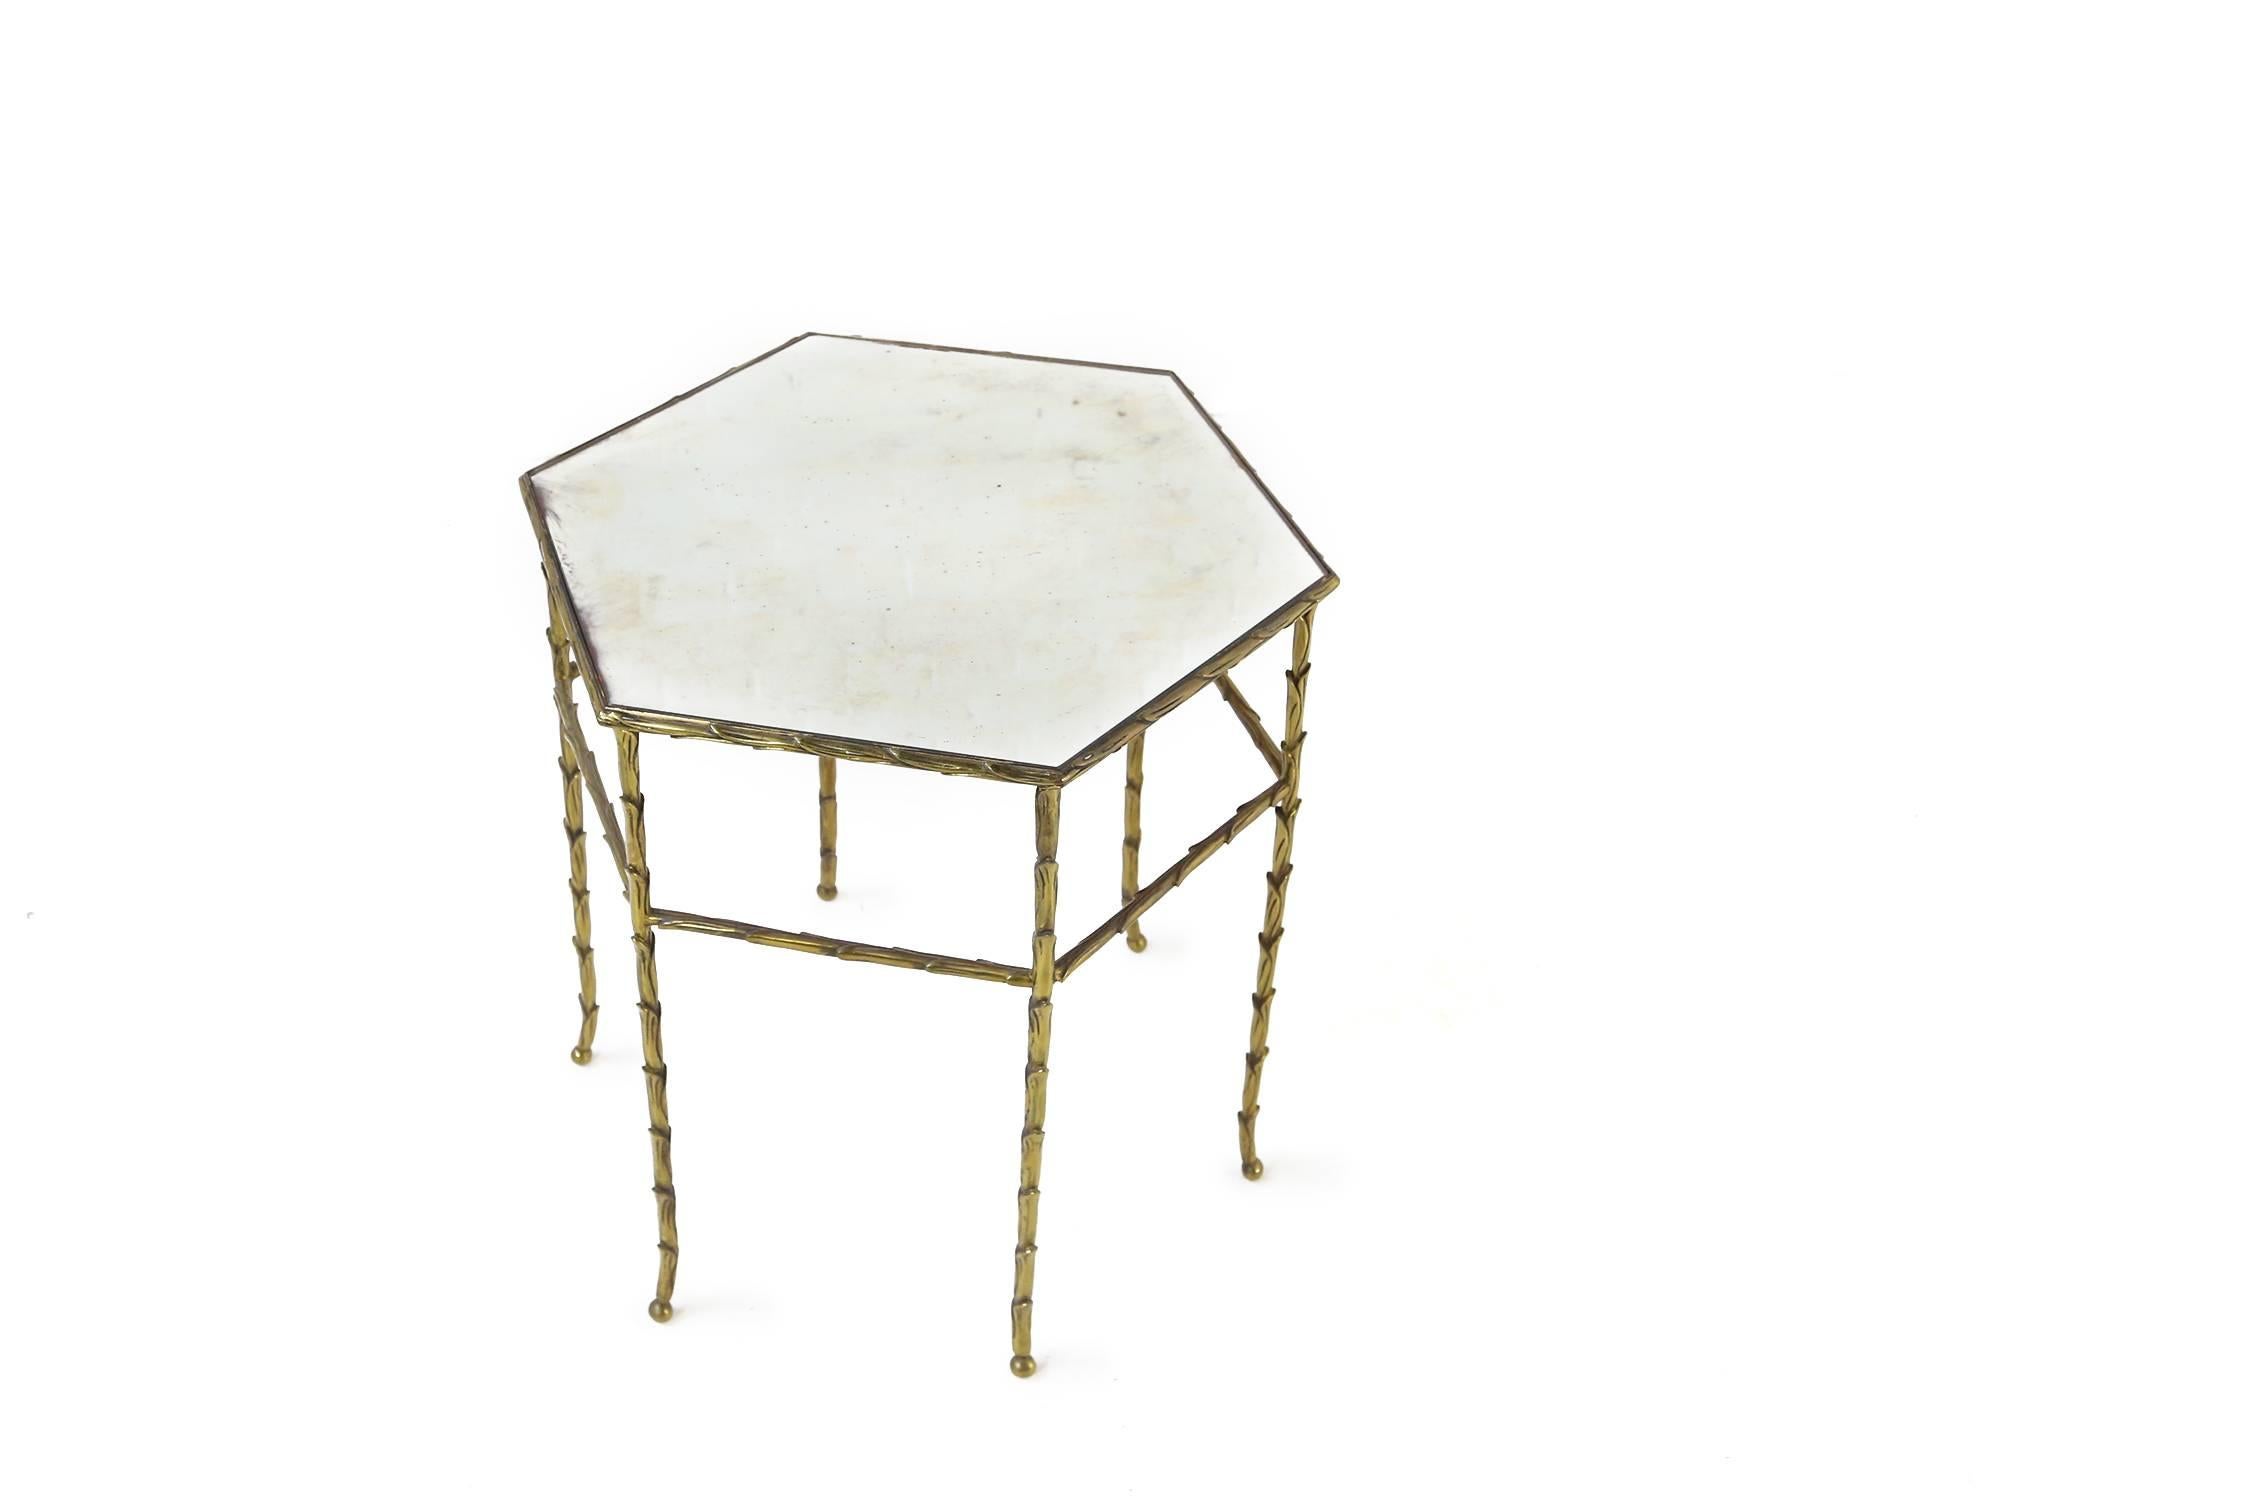 Bronze French Faux Bamboo Brass Hexagonal Table from Maison Bagues, 1950s For Sale